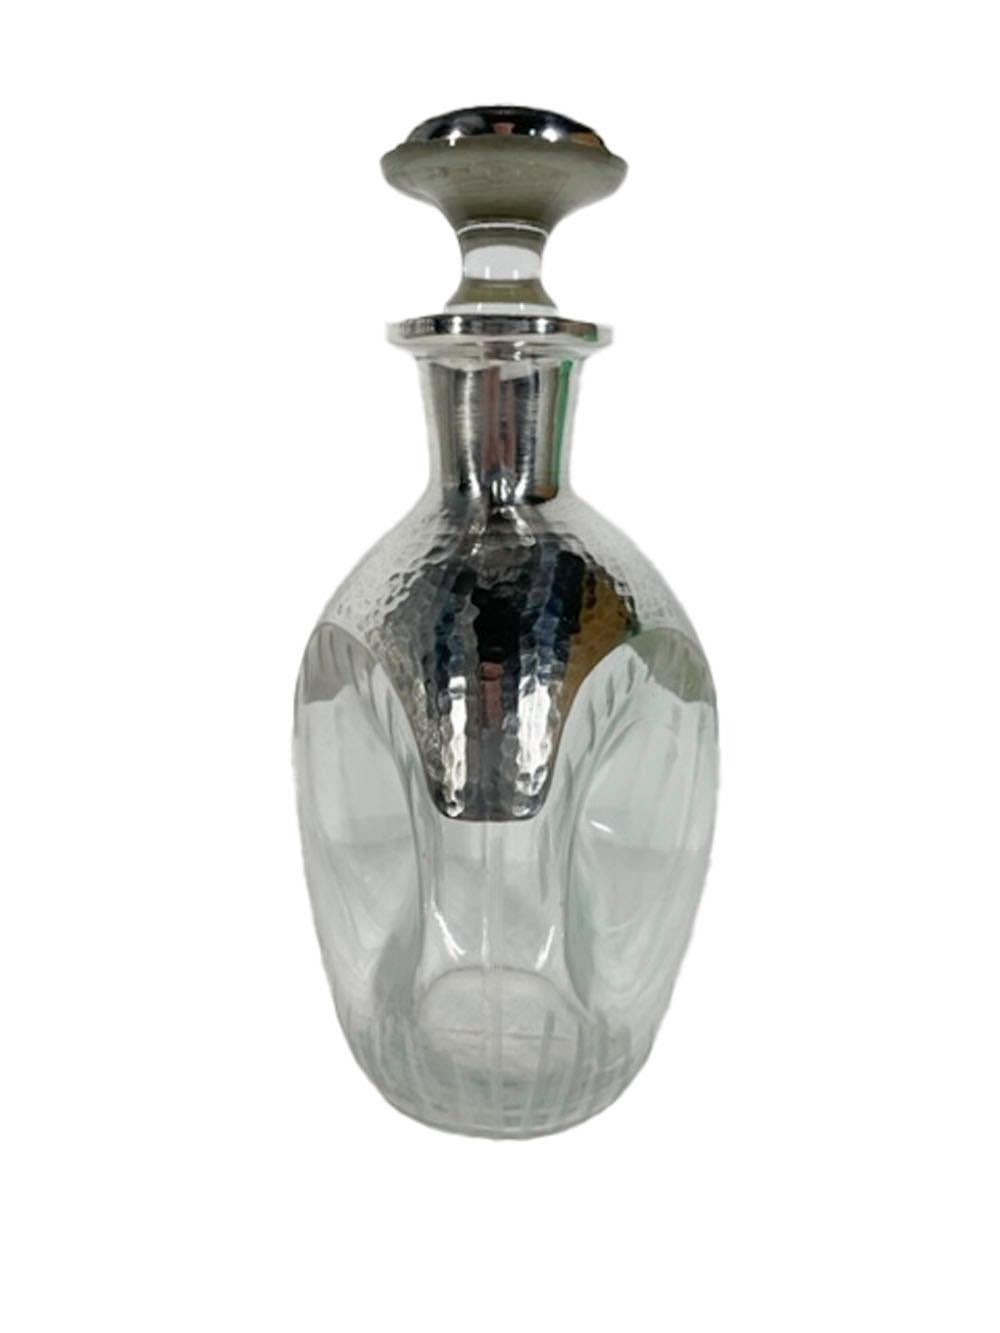 20th Century Art Deco Pinch Decanter with Hammered Silver Overlay and Vertical Etched Lines